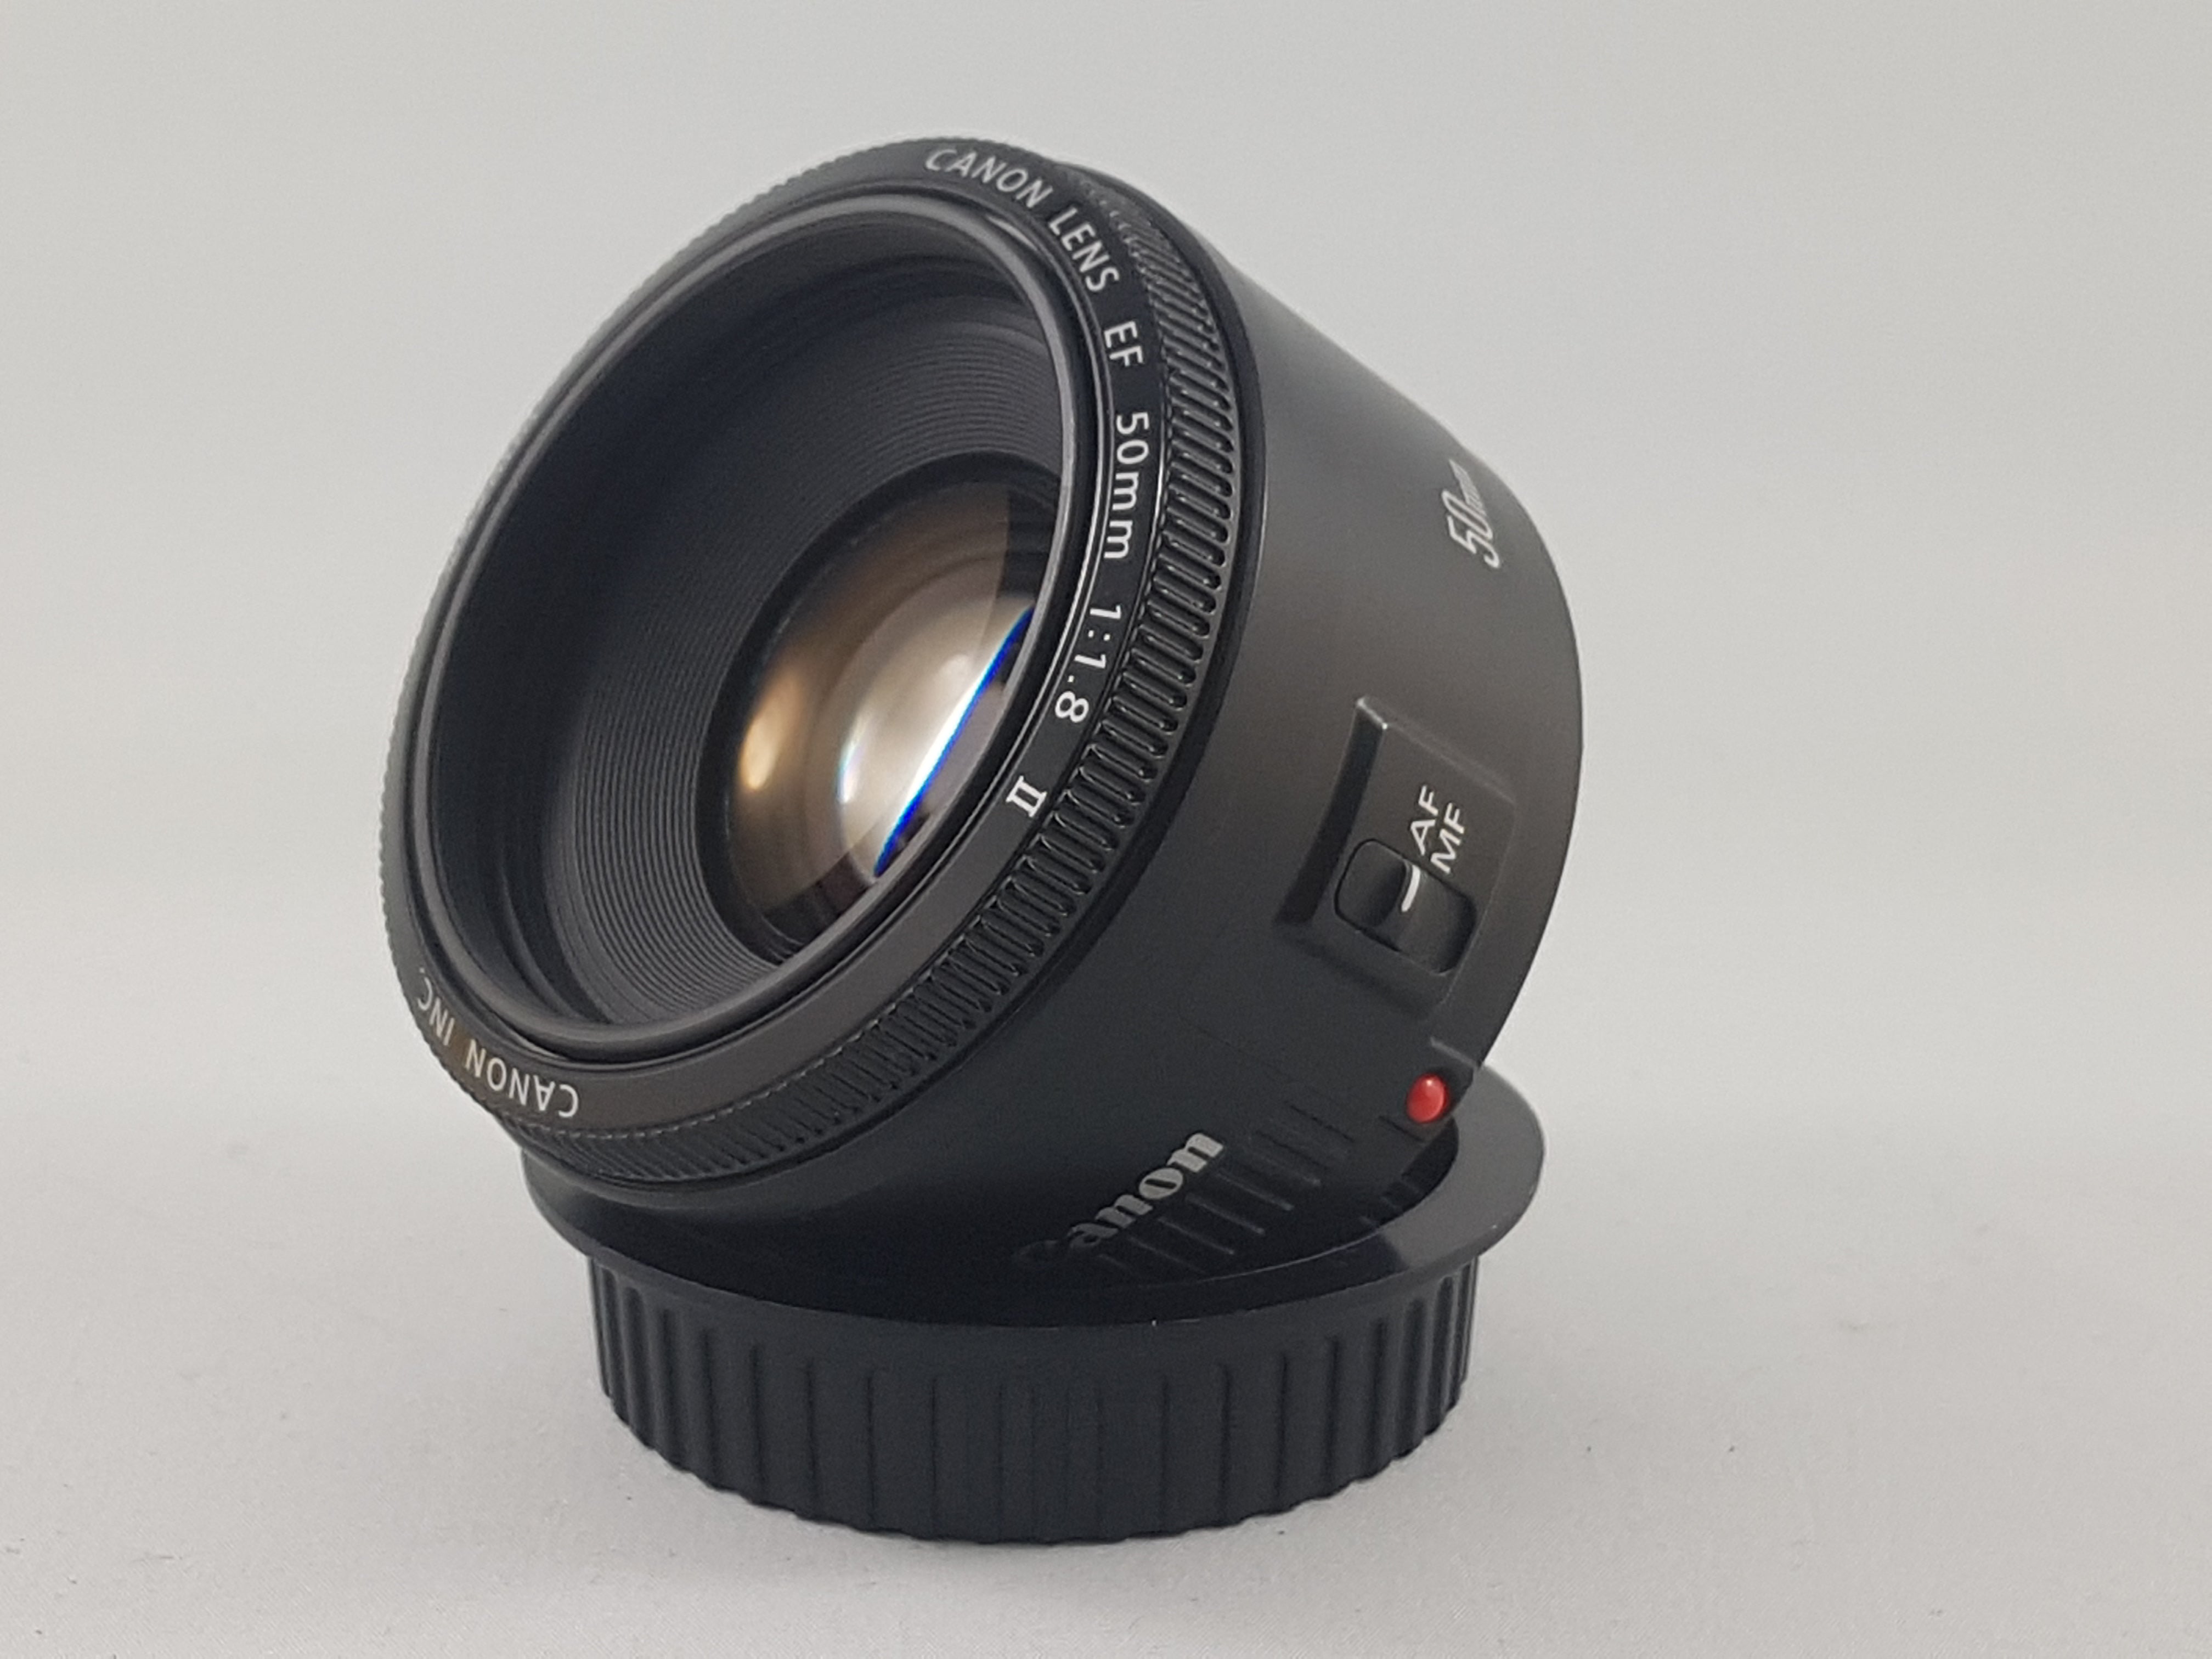 Canon EF 50mm f/1.8 II lens - Used Condition 10/10